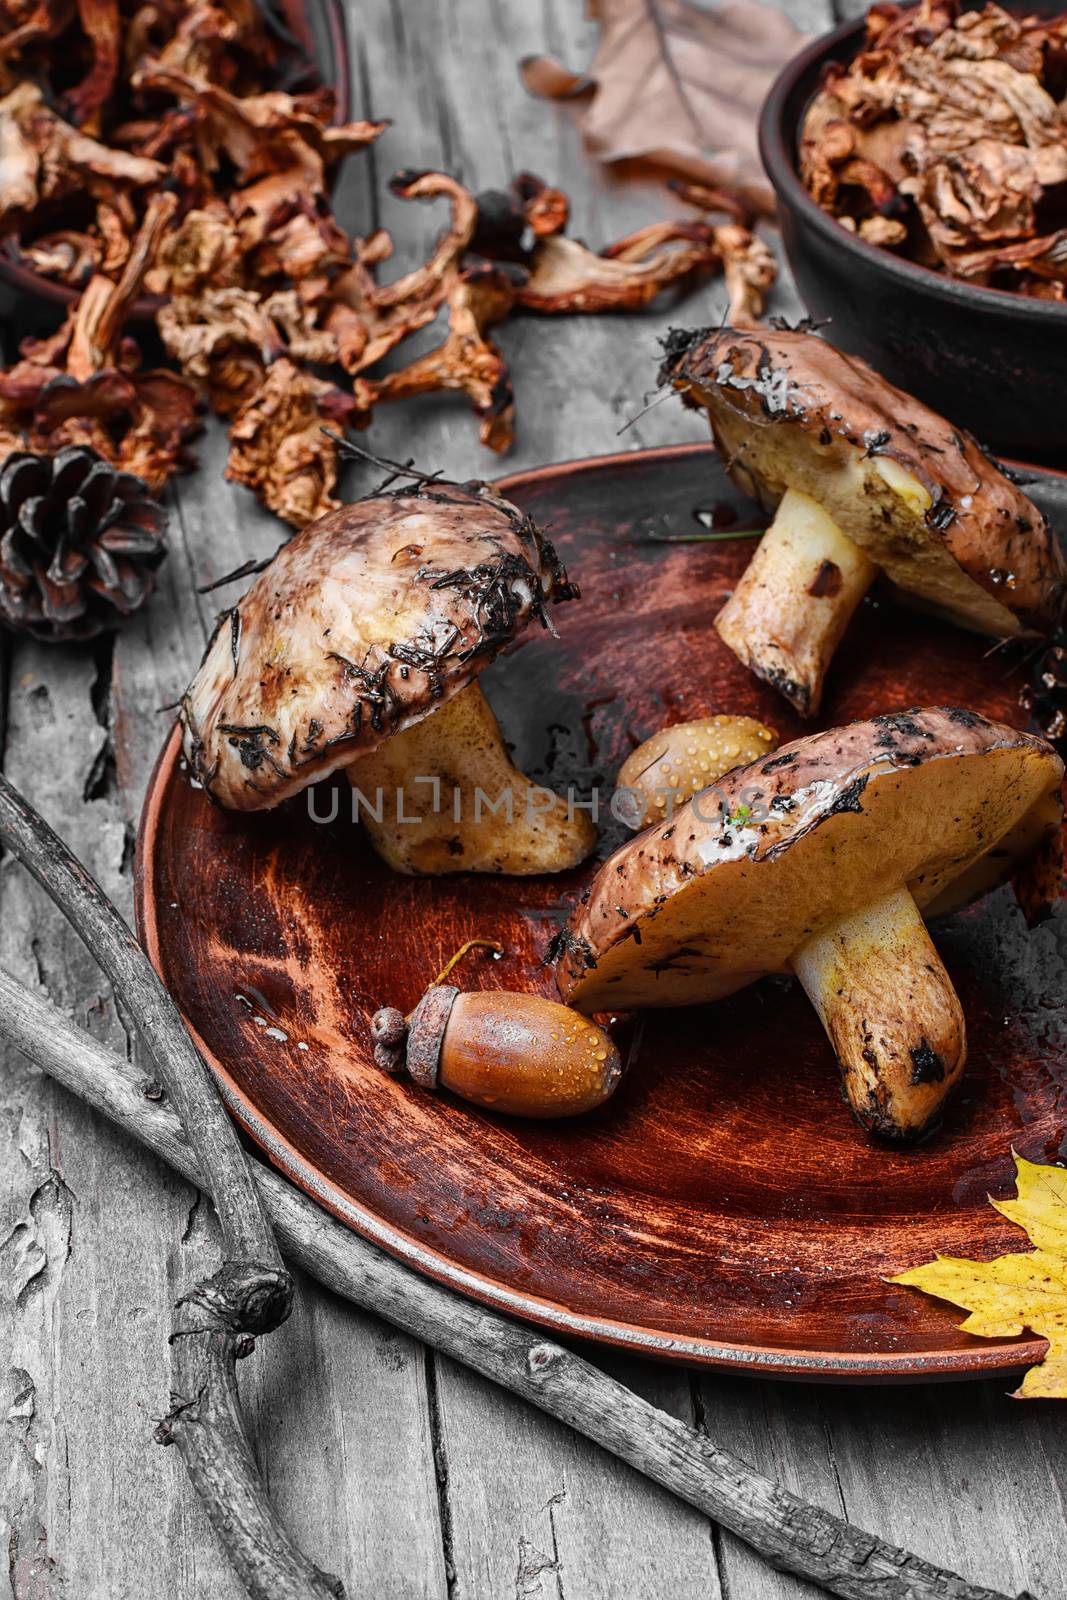 Plate collected in the forest boletus mushrooms on wooden background